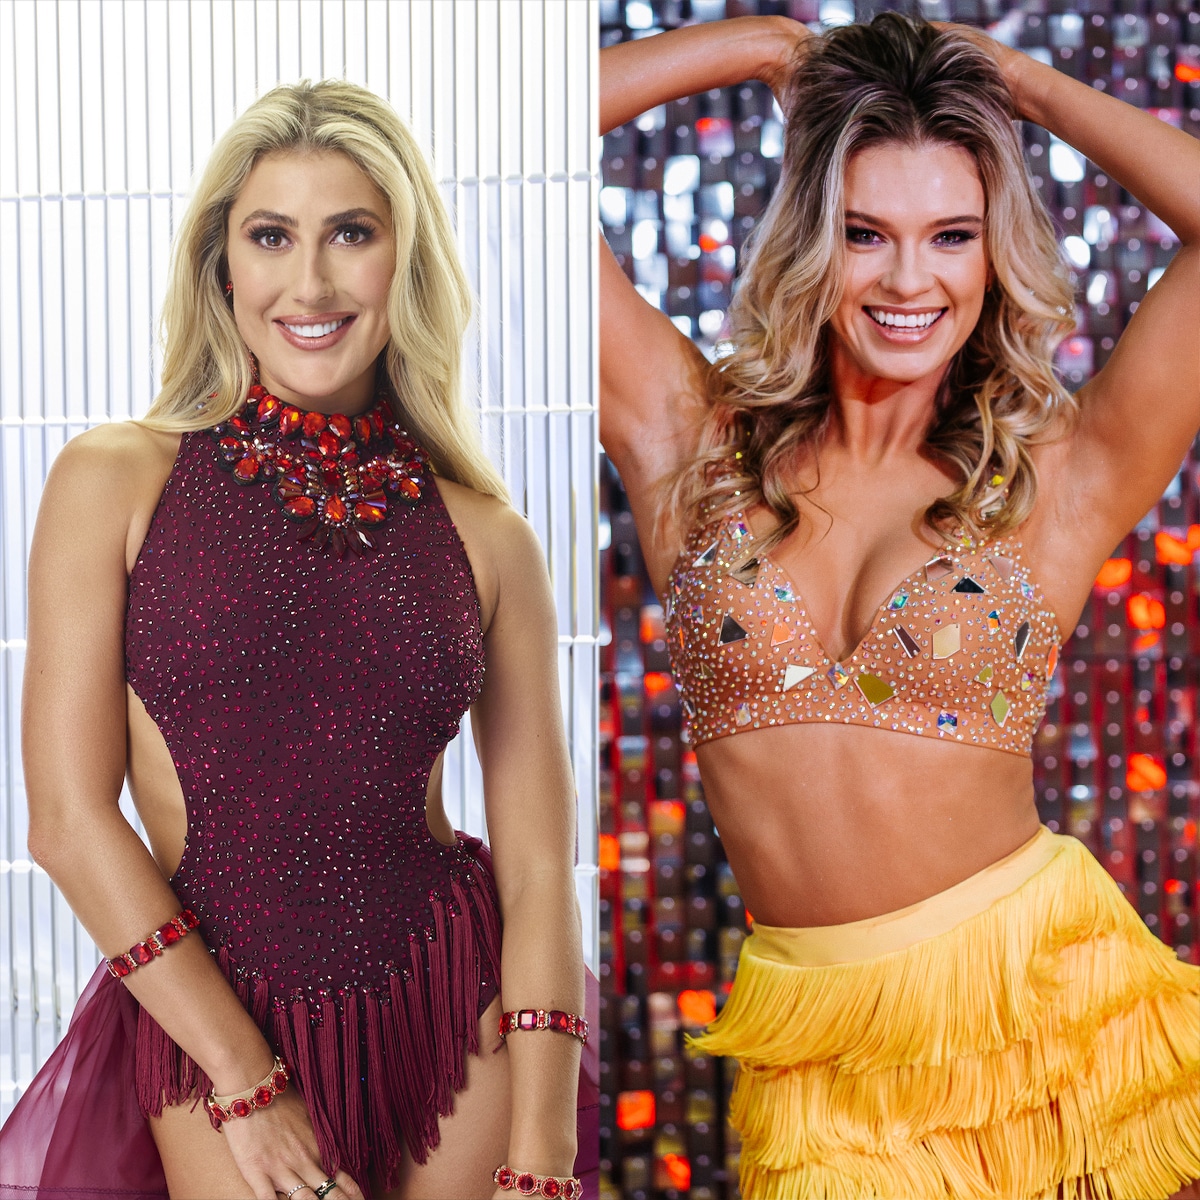 Beauty Hacks From Dancing With the Stars Cast That Deserve a 10 - E! Online  - CA